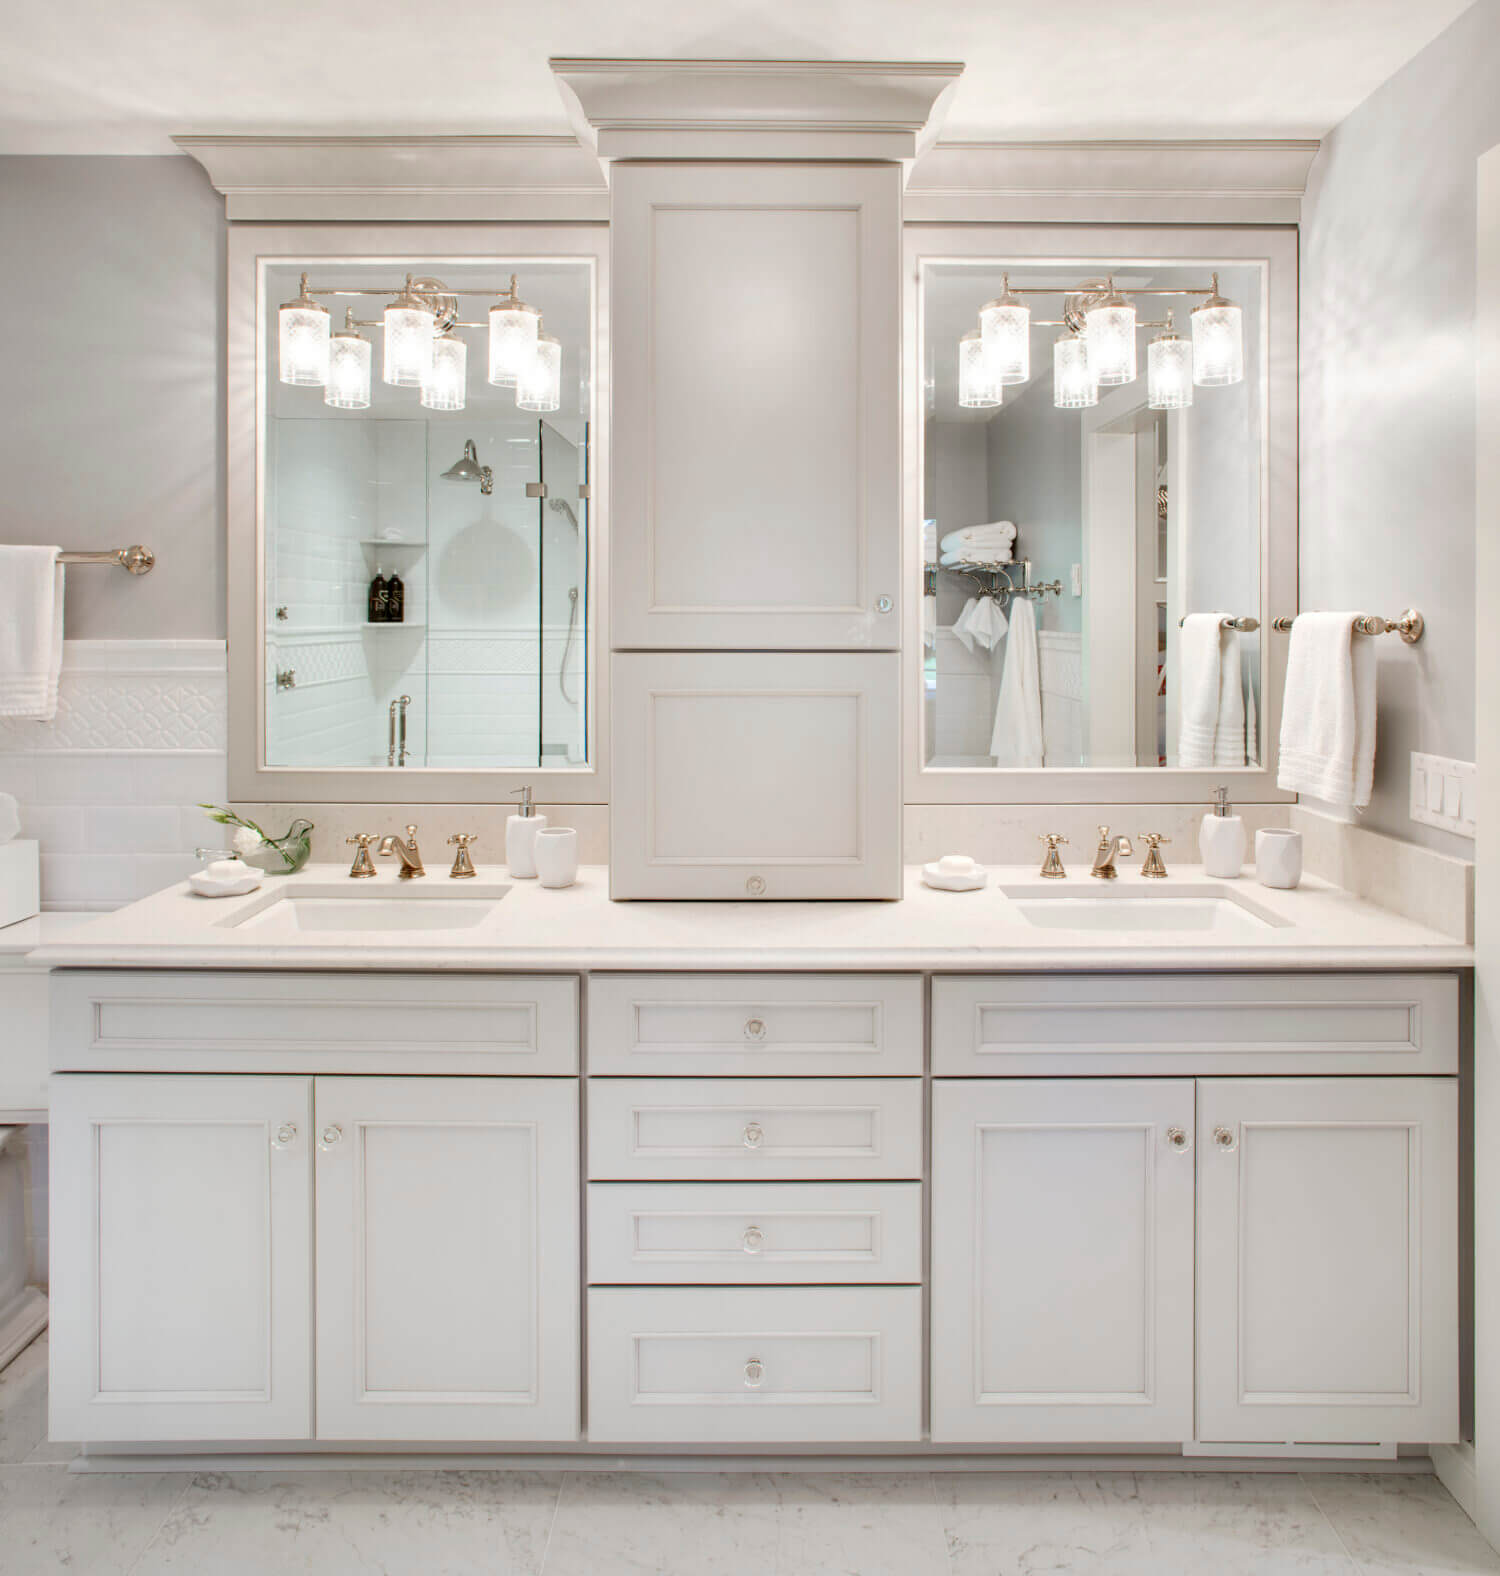 Light Gray and White Steal the Show in a Master Bathroom Remodel - Dura ...